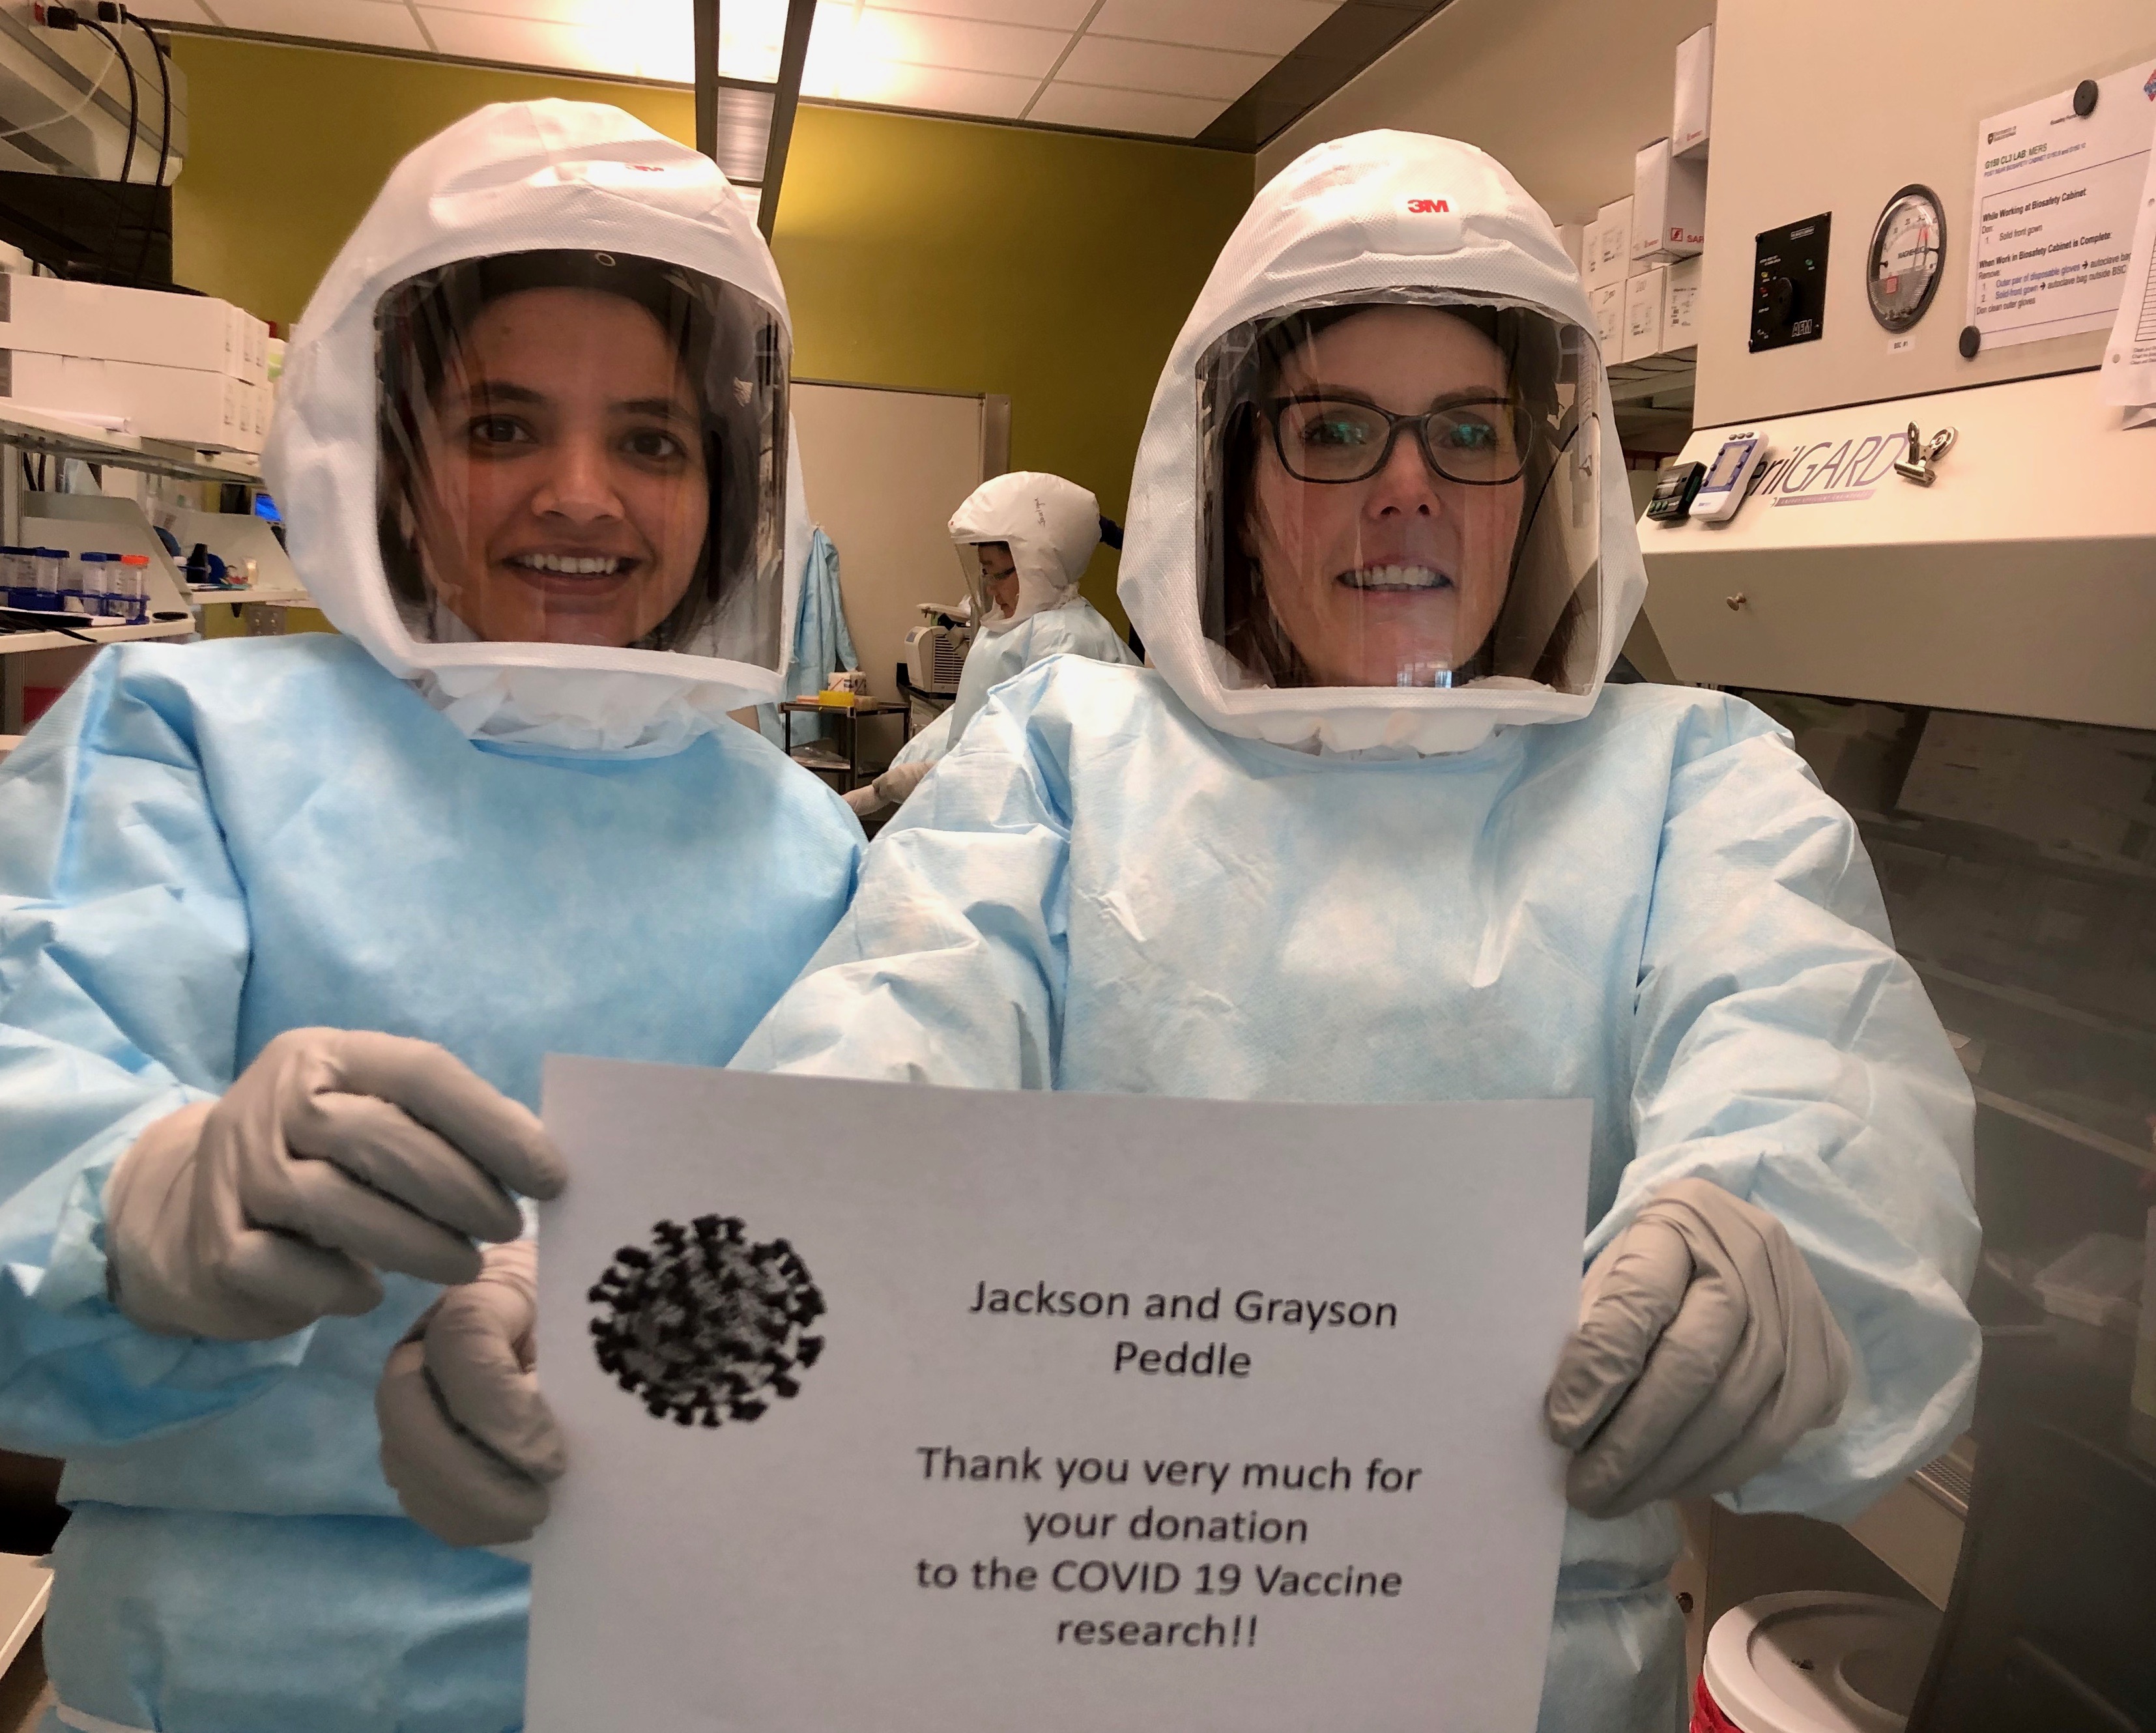 From left: Graduate student, Swarali Kulkarni and research technician, Jill Van Kessel of the VIDO-Intervac research team expressed their gratitude to Jackson and Grayson for their support of the COVID-19 Research Fund. (Photo: Submitted)